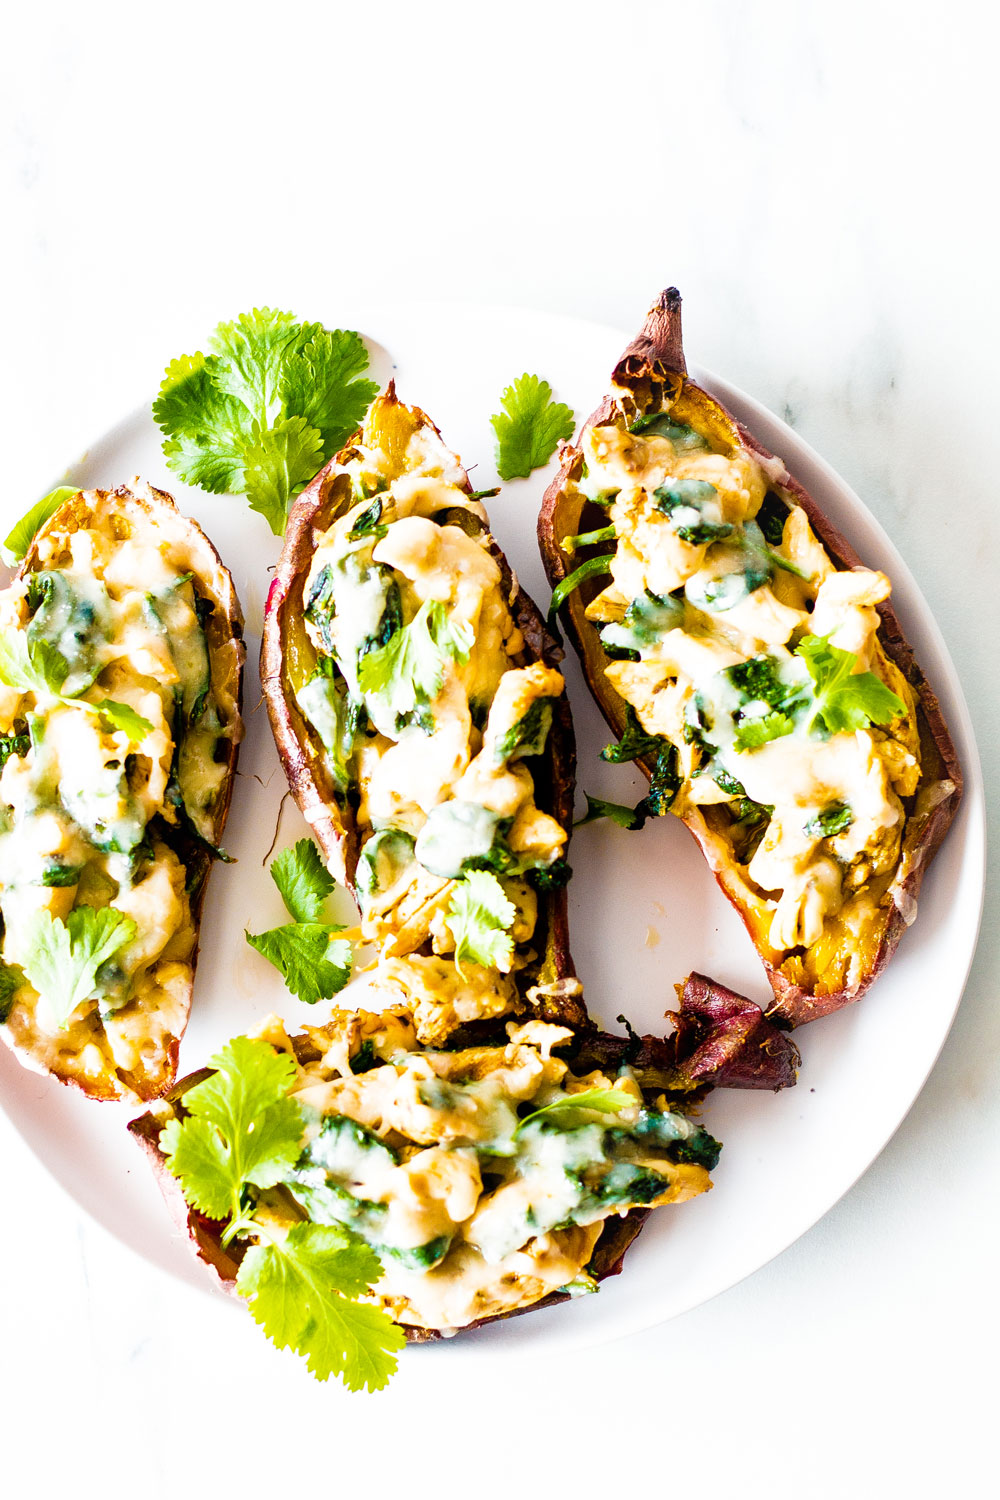 This easy and cheesy turkey stuffed sweet potato skins recipe uses up leftover meat and veggies from all the winter festivities. https://www.spotebi.com/recipes/cheesy-turkey-stuffed-sweet-potato-skins/